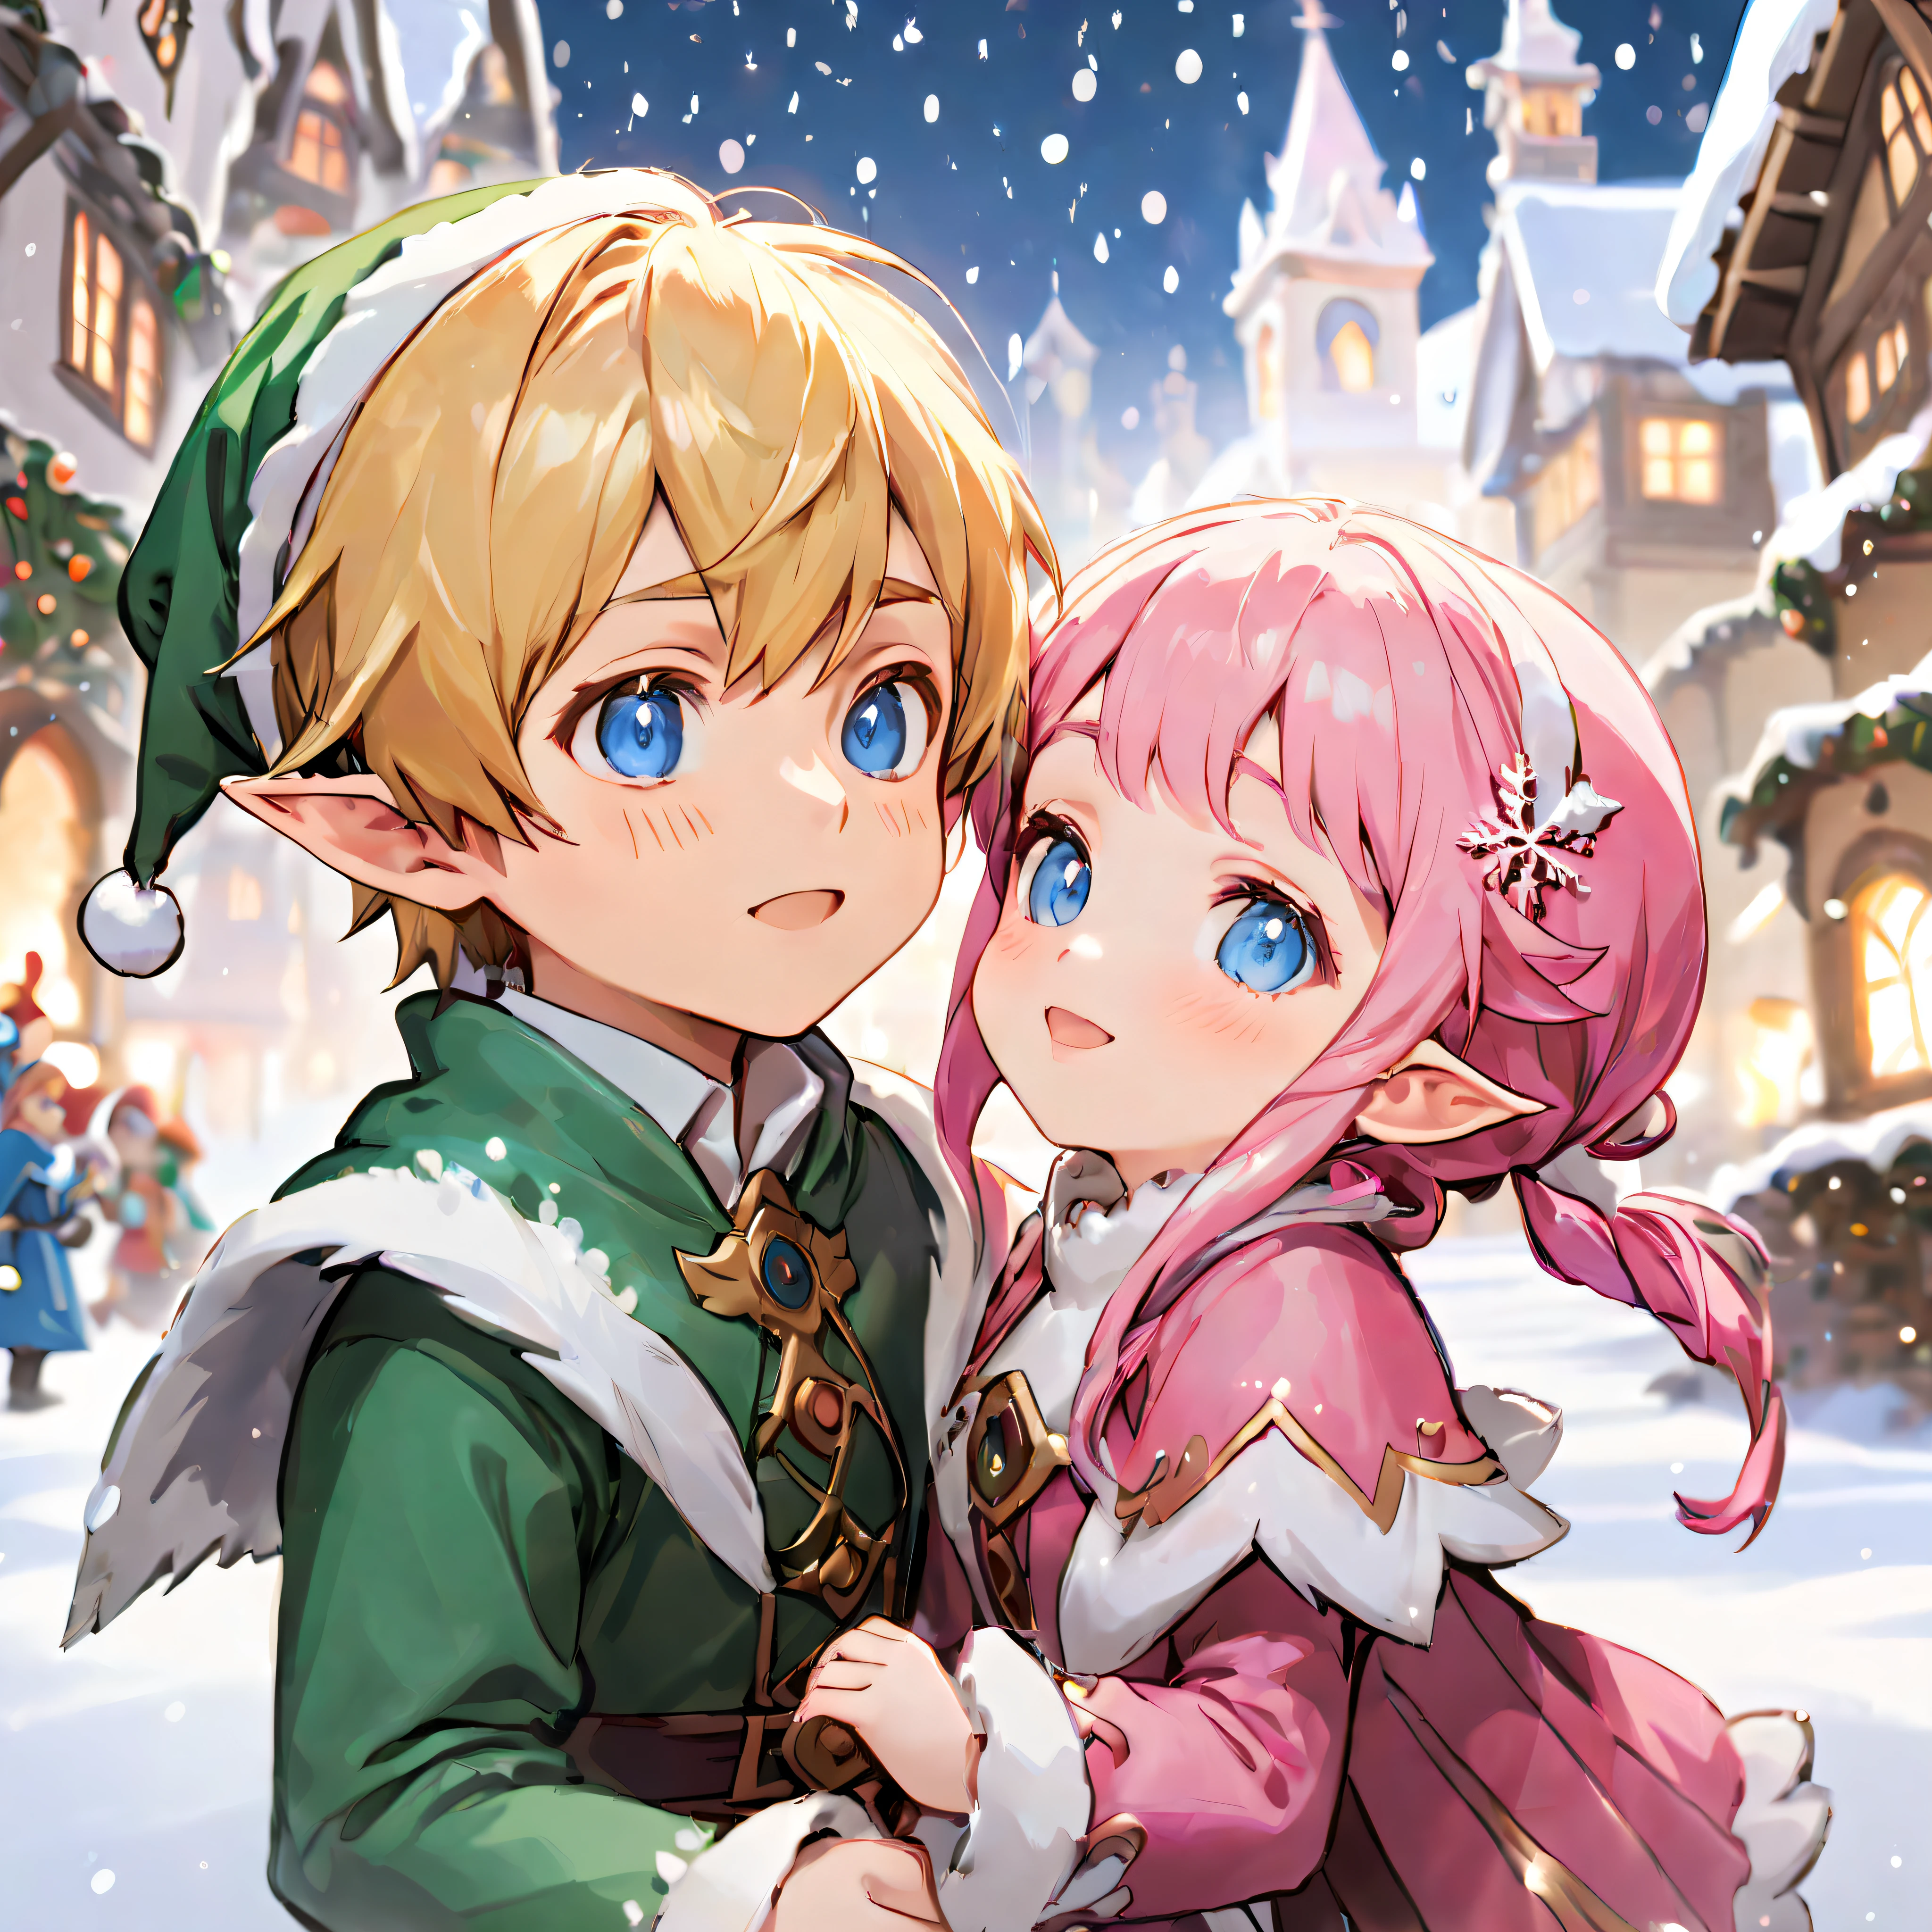 Final Fantasy 14, (elf ear), (1boy, Lalafell, golden hair, blue eyes), (1girl, lalafell, (pink hair) and blue eyes) both dressed in festive holiday attire, Close-up, Camera Angle Slightly tilted, Background: A snowy and festive, with snowflakes gently falling, creating a magical winter wonderland, best quality, masterpiece, ultra-detailed, 8k, depth of field, cinematic composition, Lighting: Soft, twinkling holiday lights casting a warm and festive glow.